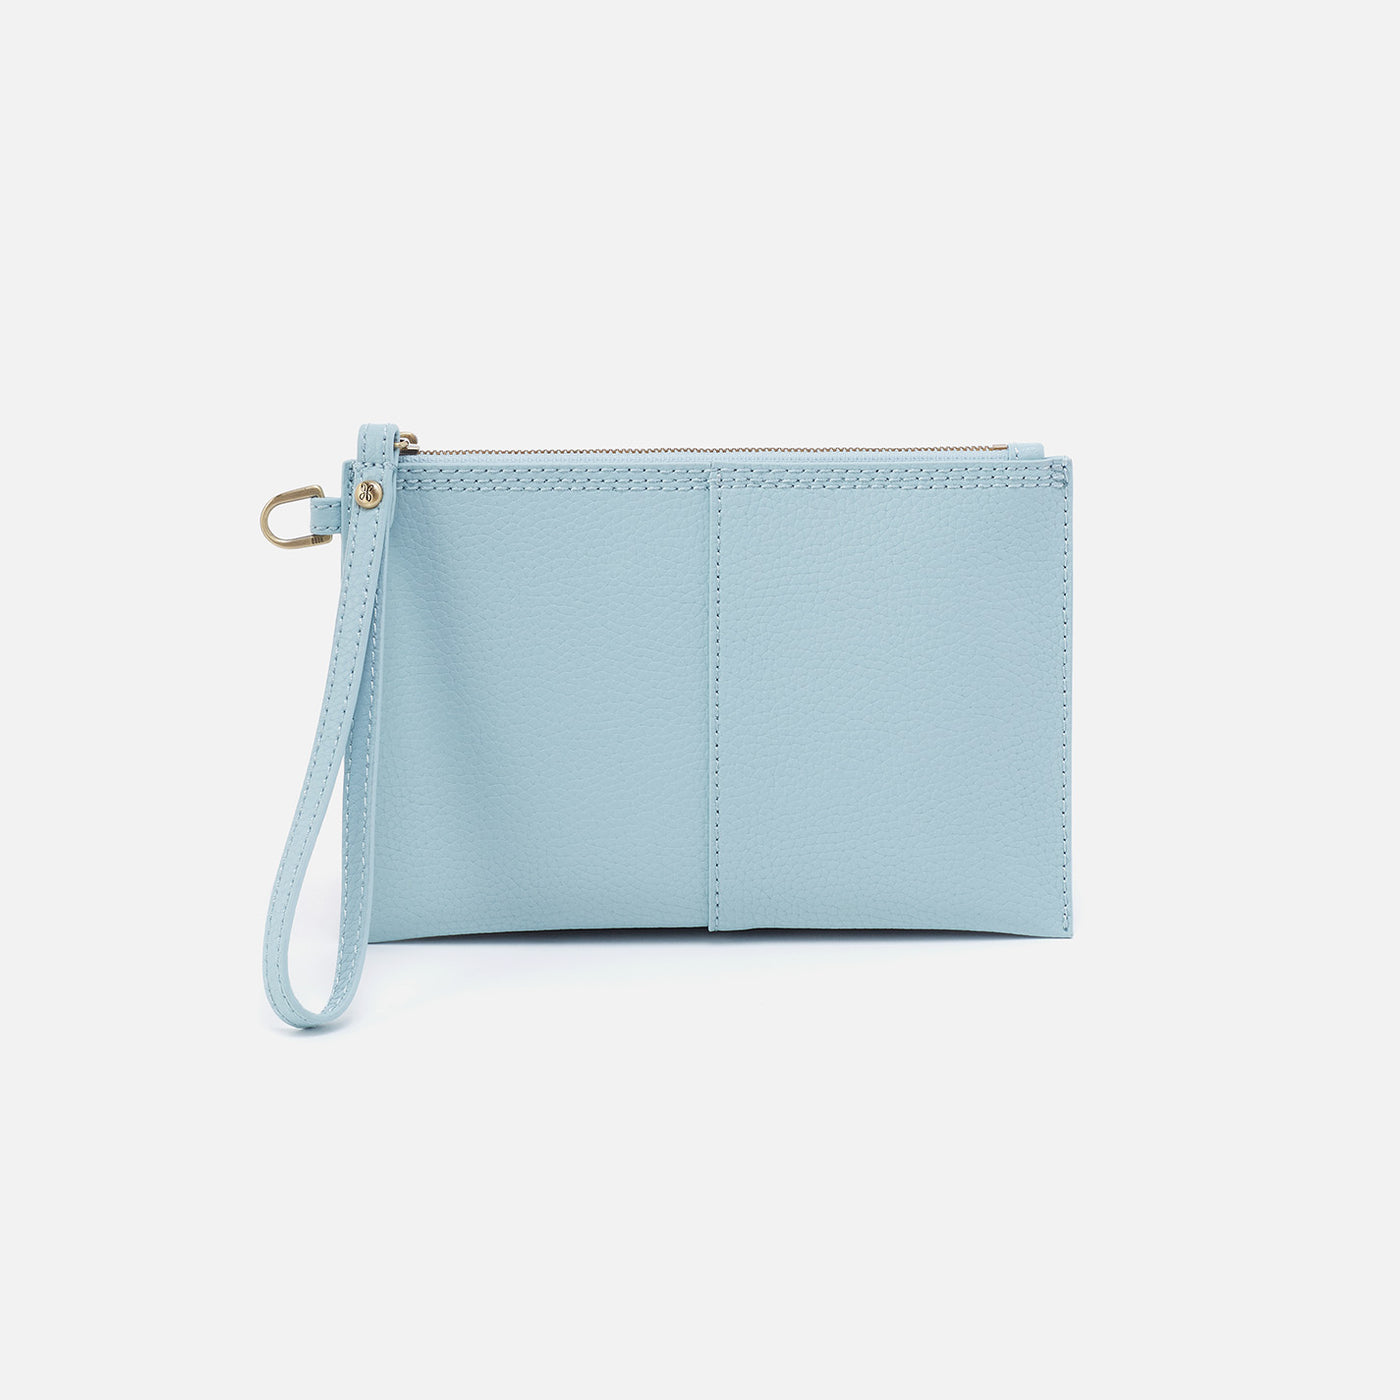 Vida Small Pouch in Micro Pebbled Leather - Starlight Blue and Oro